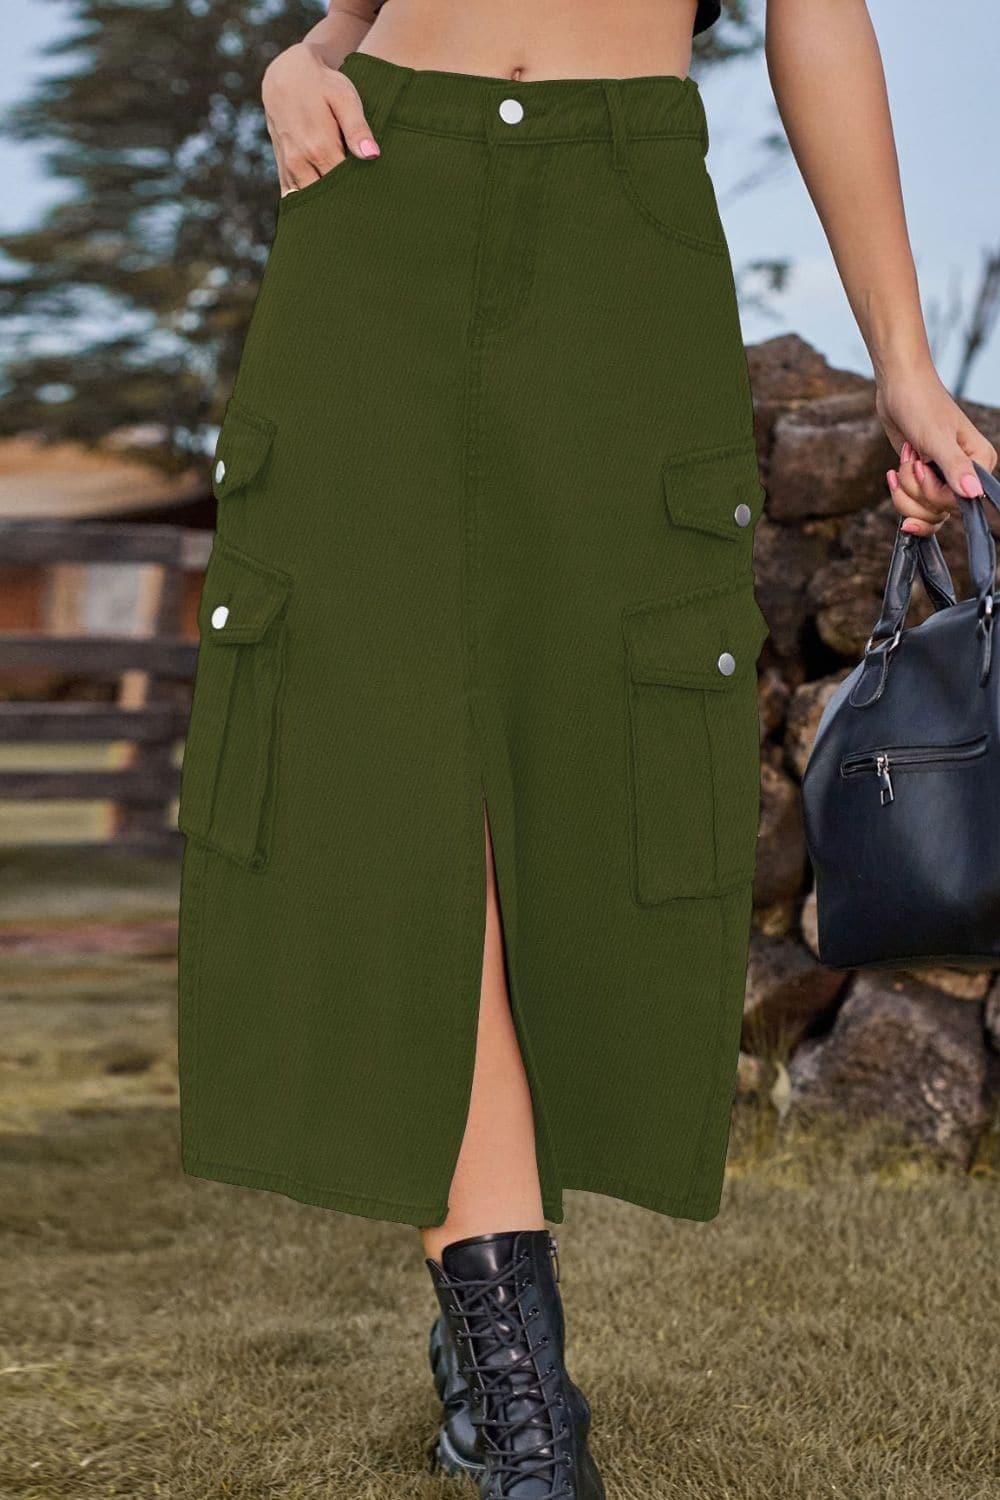 Slit Front Midi Denim Skirt with Pockets, Multiple Colors - SwagglyLife Home & Fashion